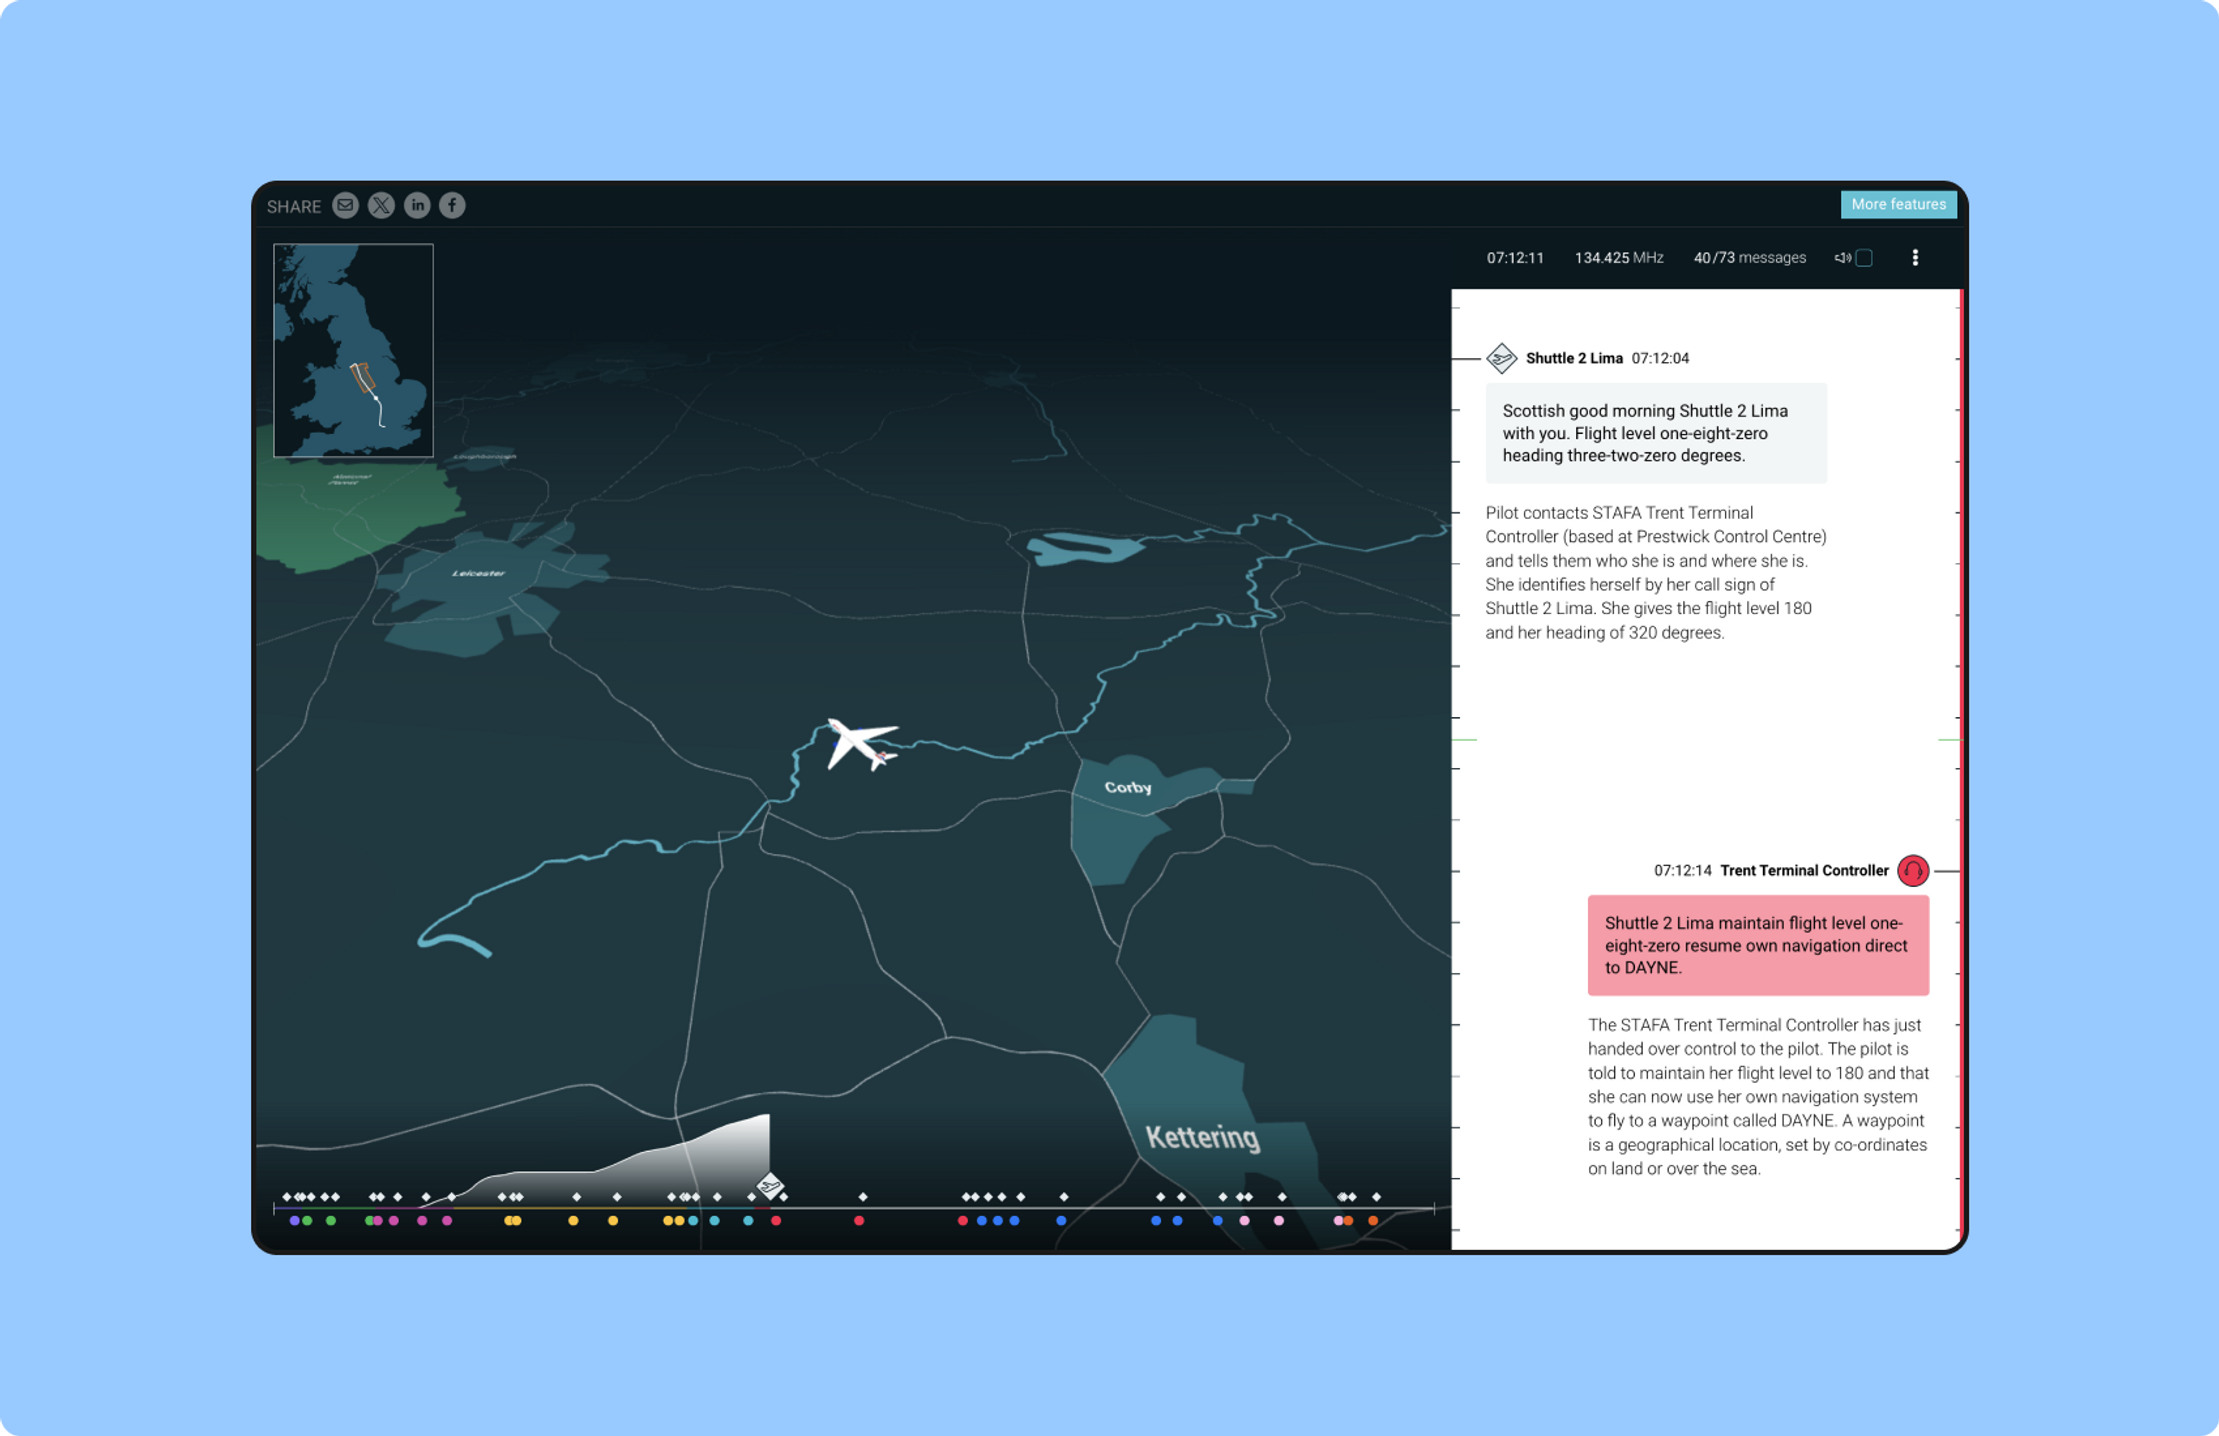 A screenshot from the plane talking website. On the left is a graphic of a plane flying over the UK. On the right is text showing the conversations of air traffic controllers during the flight.